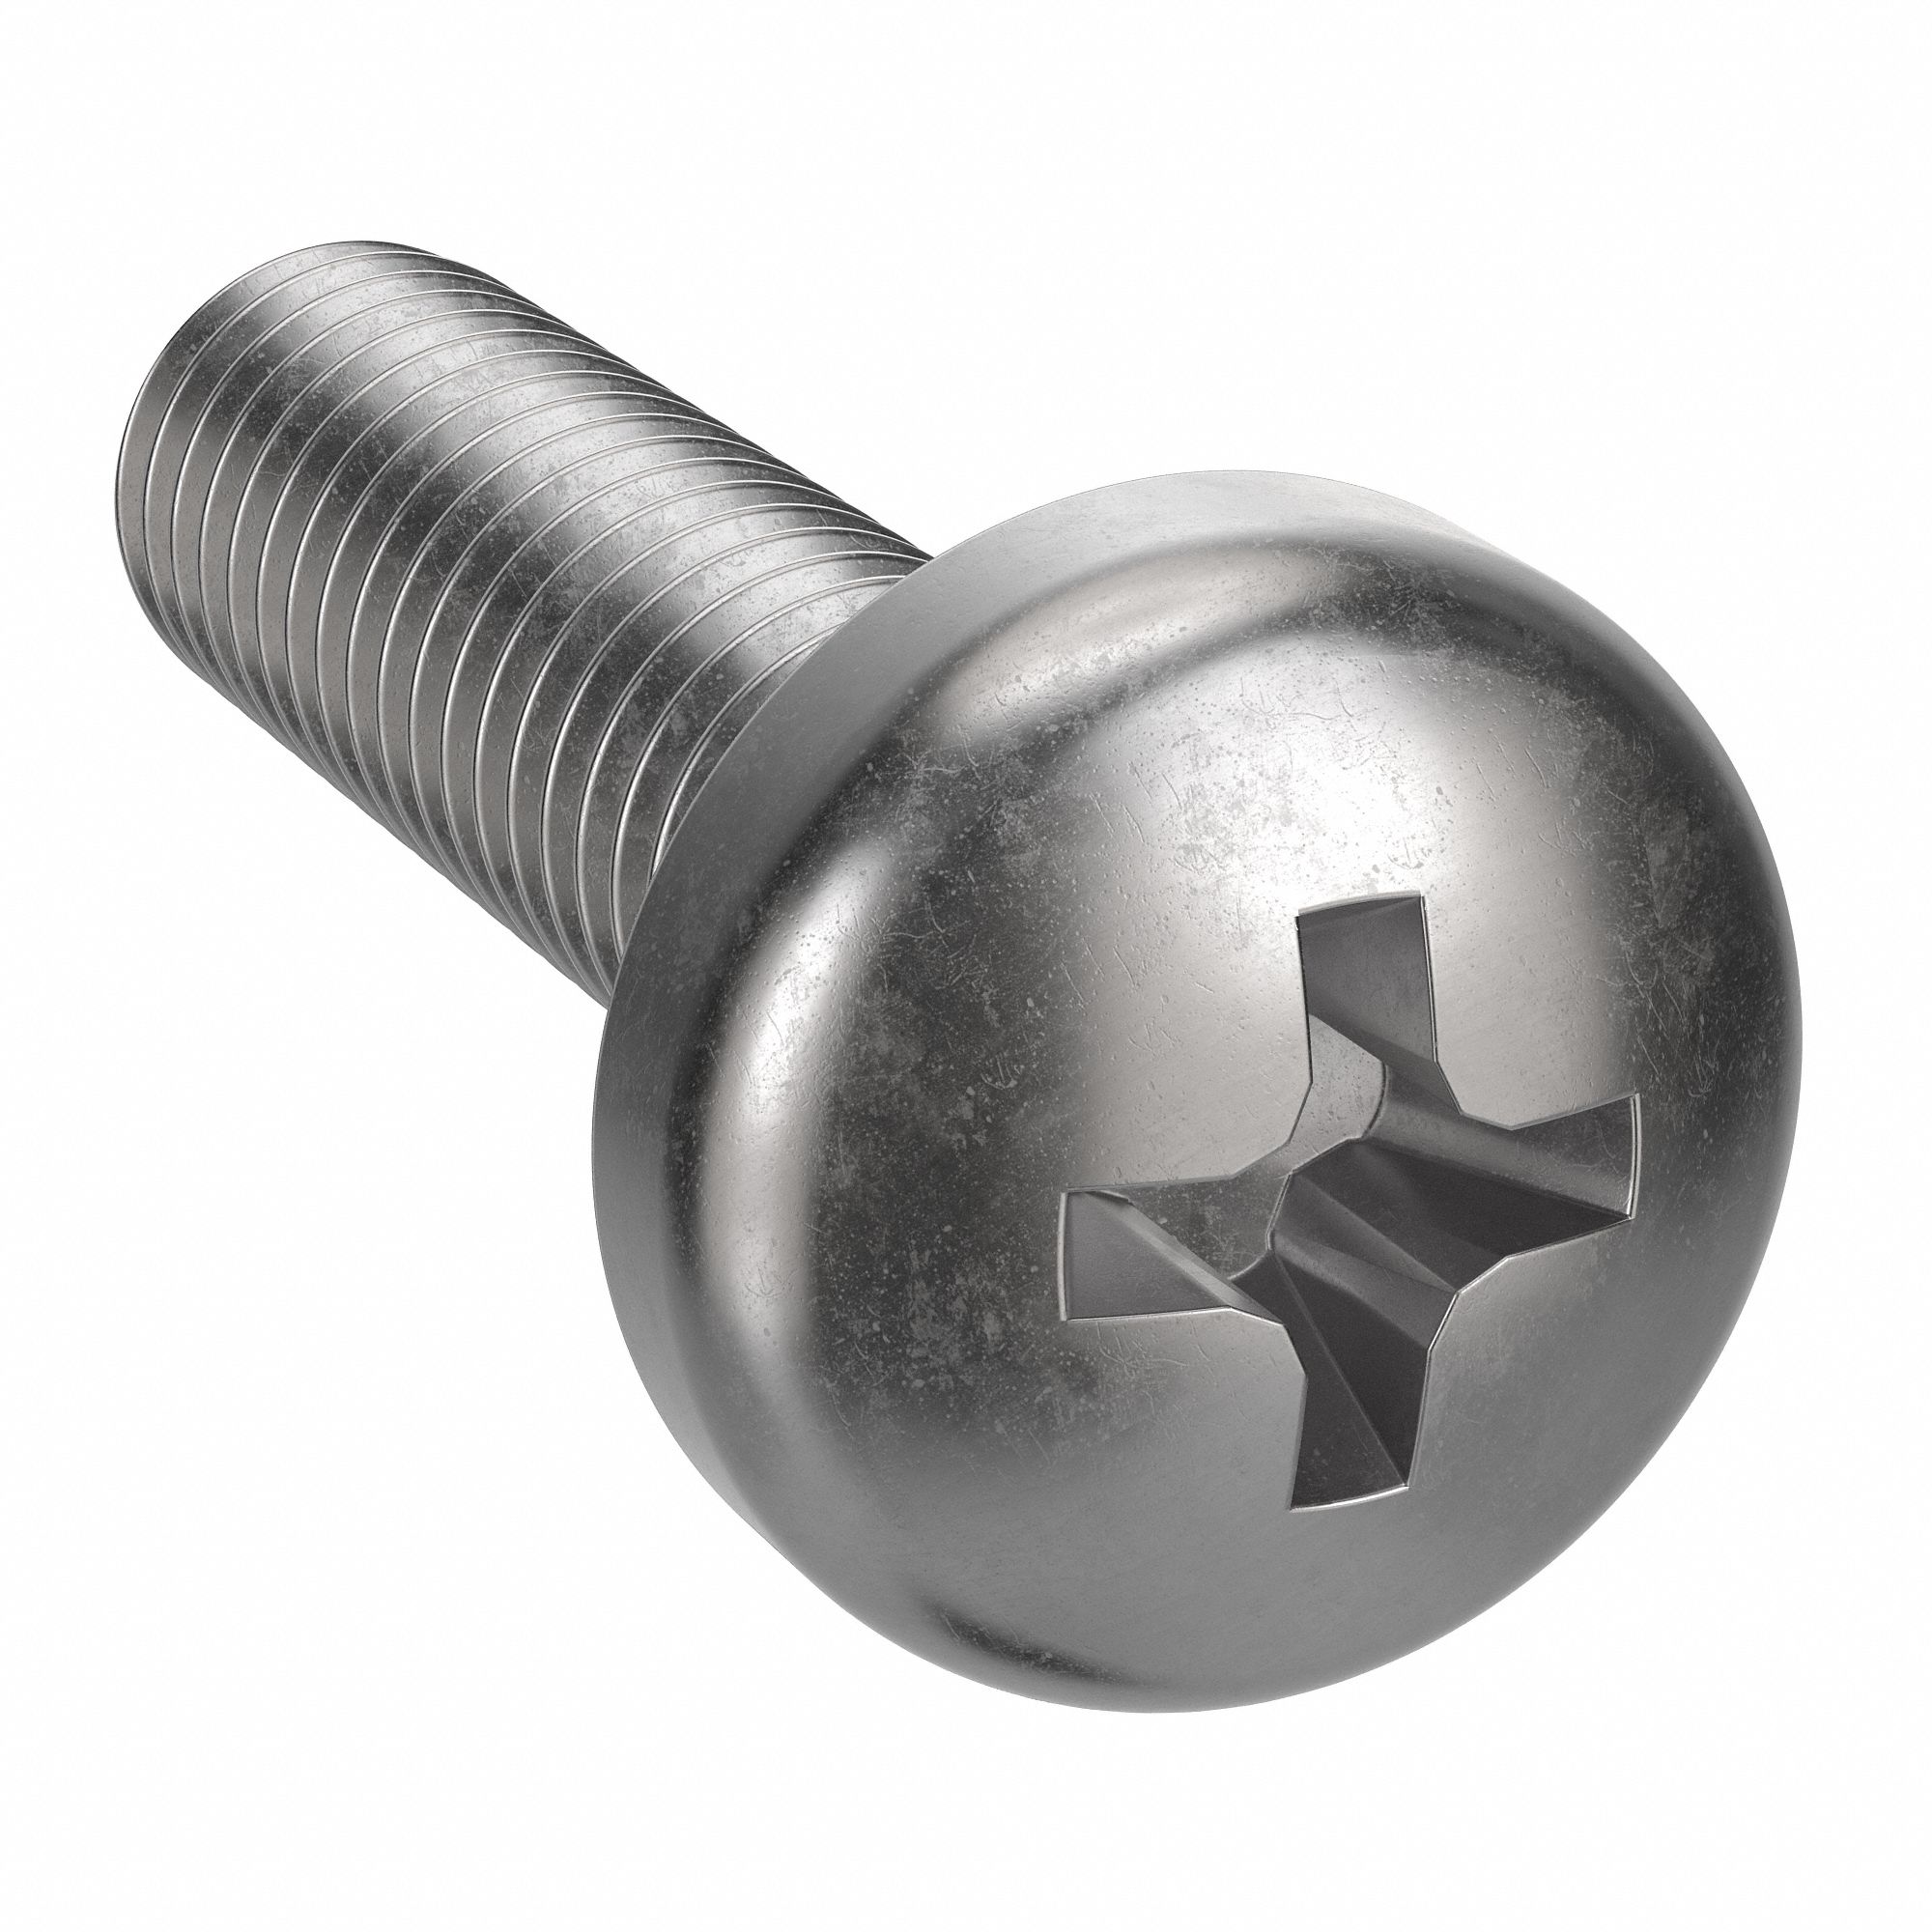 Meets ASME B18.6.3 Round Head 3/8-16 Threads Fully Threaded Slotted Drive Pack of 5 Plain Finish 2 Length 18-8 Stainless Steel Machine Screw